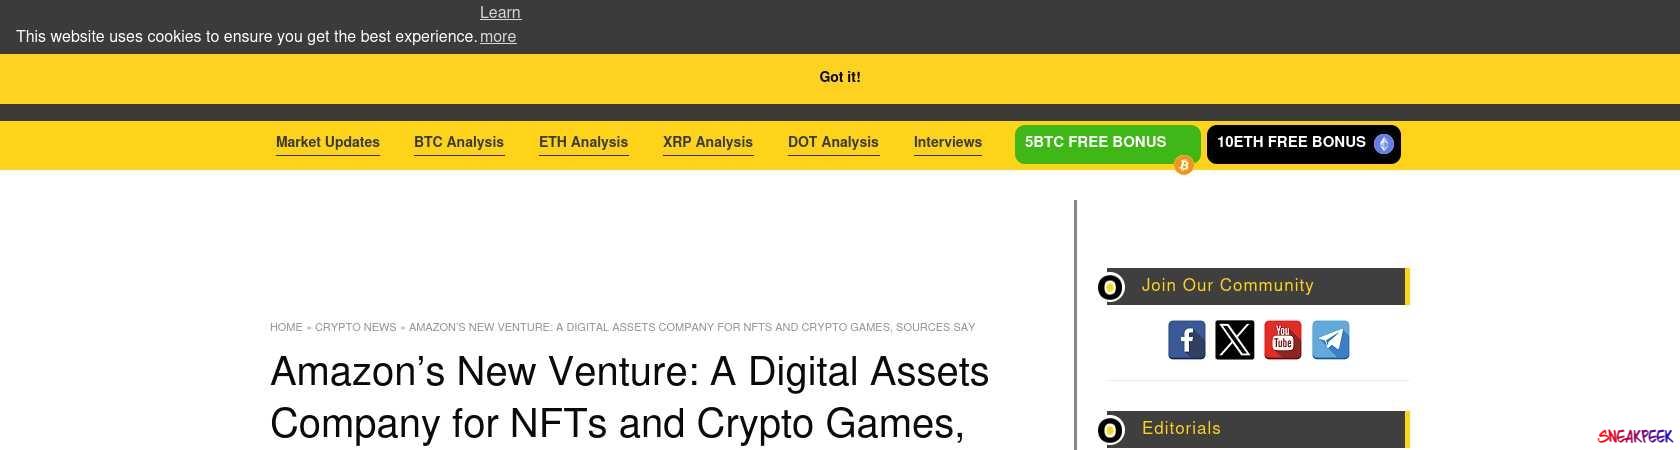 Read the full Article:  ⭲ Amazon’s New Venture: A Digital Assets Company for NFTs and Crypto Games, Sources Say